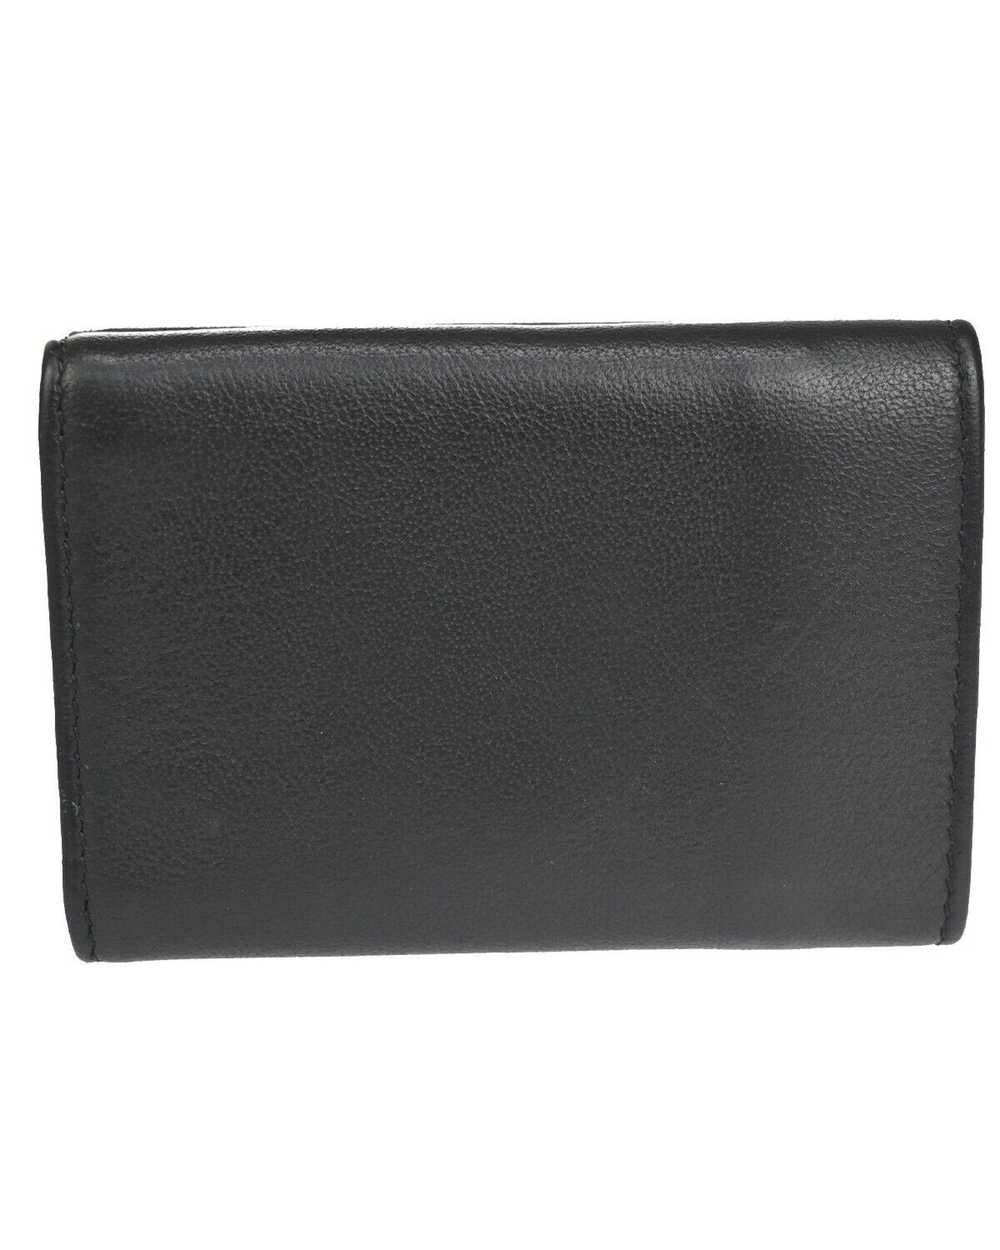 Balenciaga Sophisticated Leather Trifold Wallet w… - image 4